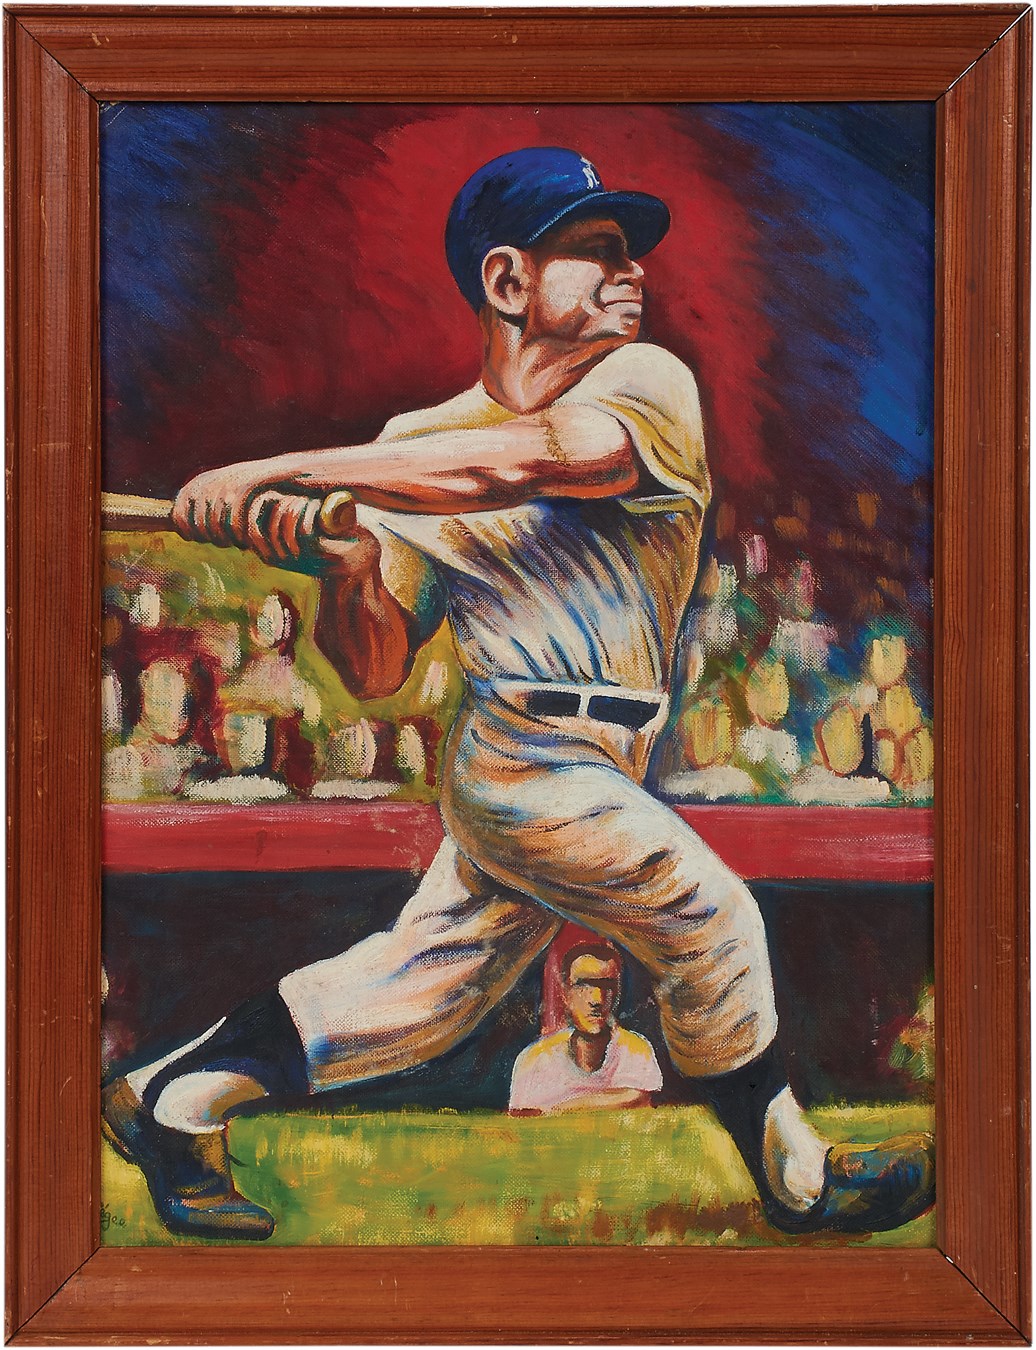 Sports Fine Art - Exceptional 1964 Mickey Mantle Abstract Oil on Canvas by Pat Young